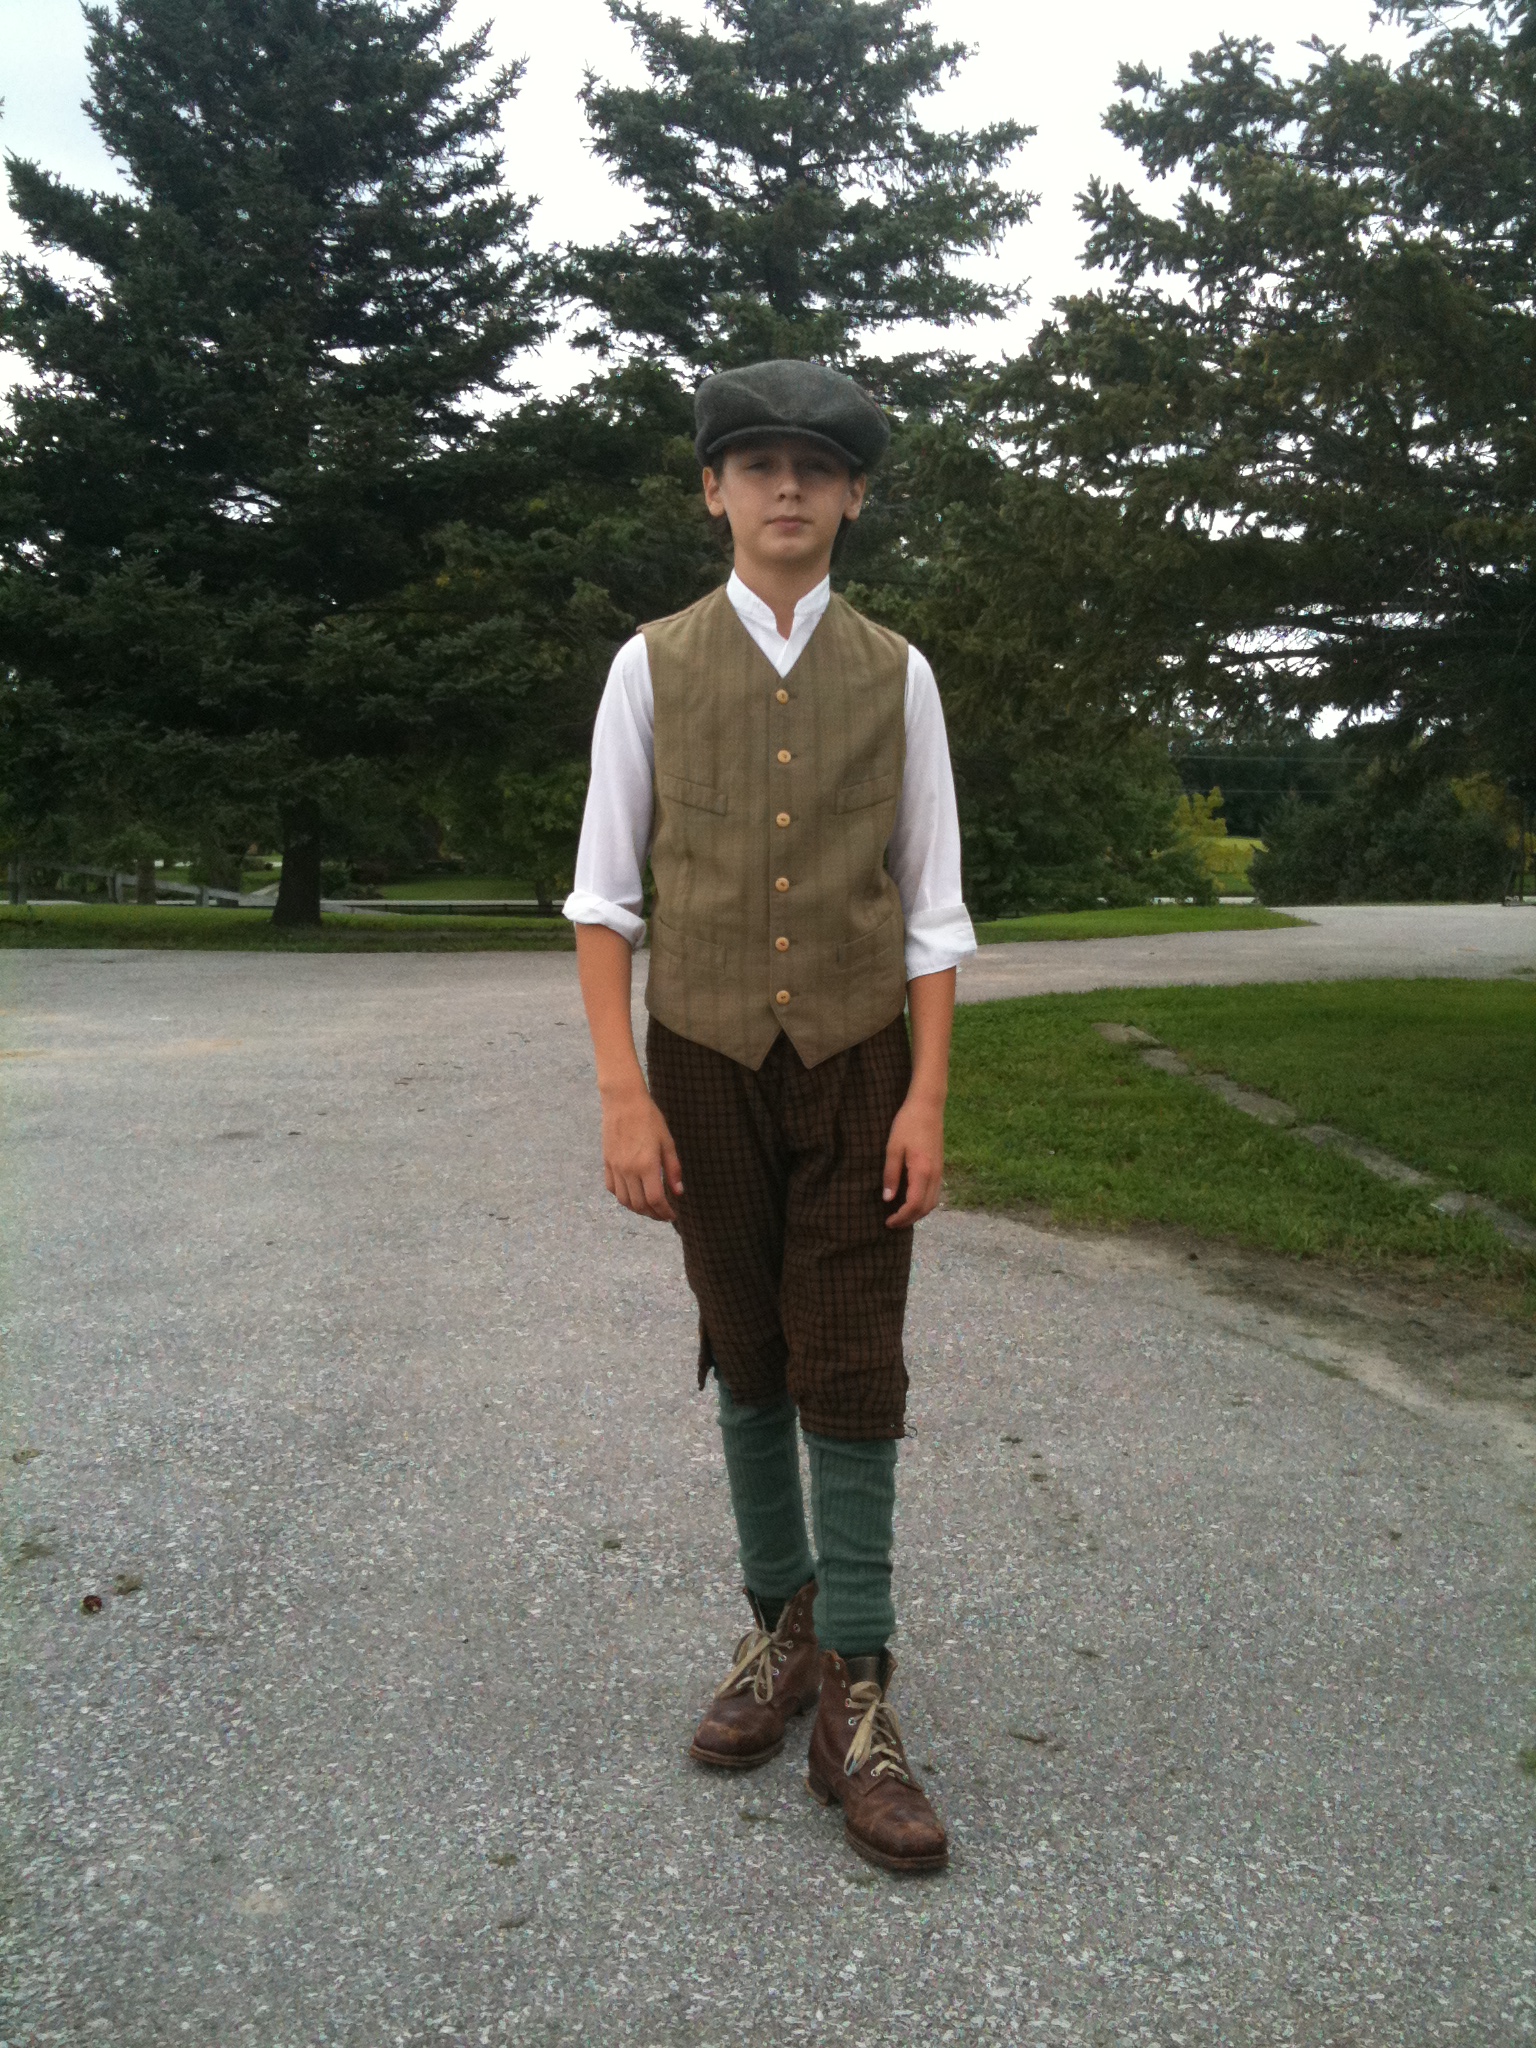 Christian Golec as young Tom Thomson in The West Wind